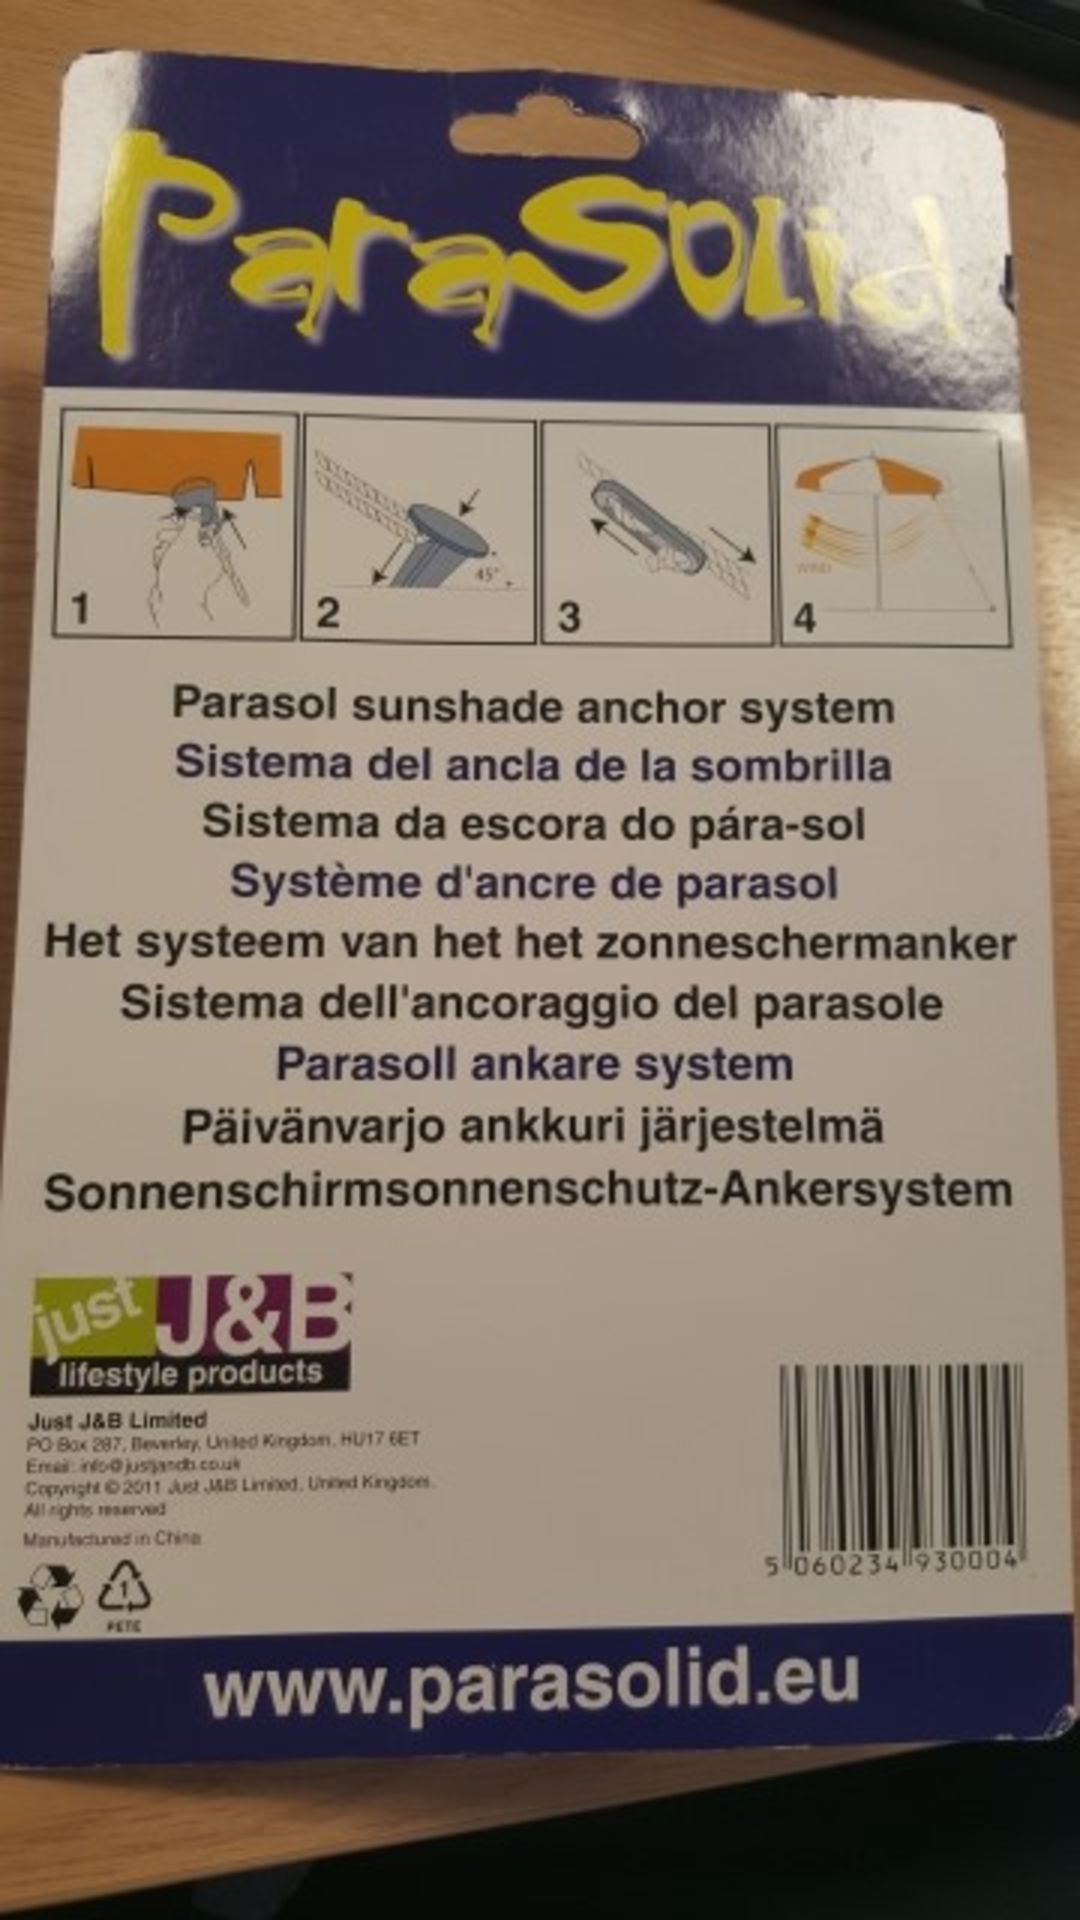 Approx 500 'Parasolid' Parasol Sunshade Anchor System in blister packs. Stock return form WH Smith - - Image 2 of 3